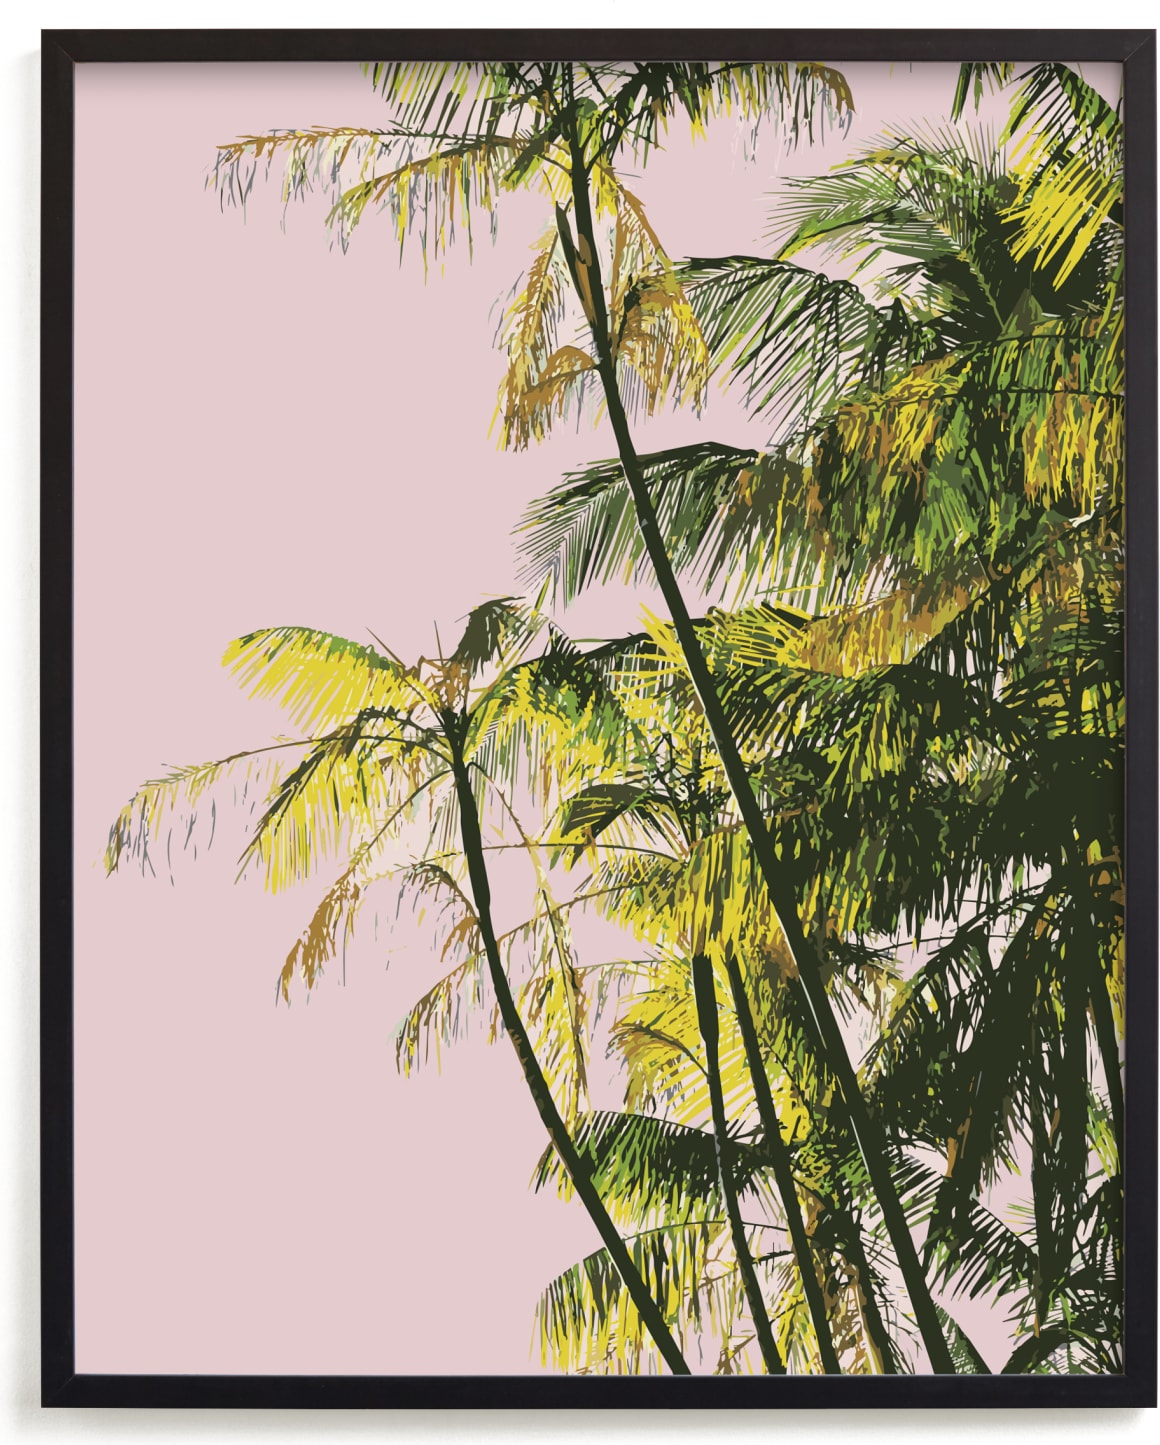 This is a colorful art by Catherine Culvenor called Poster Palms.